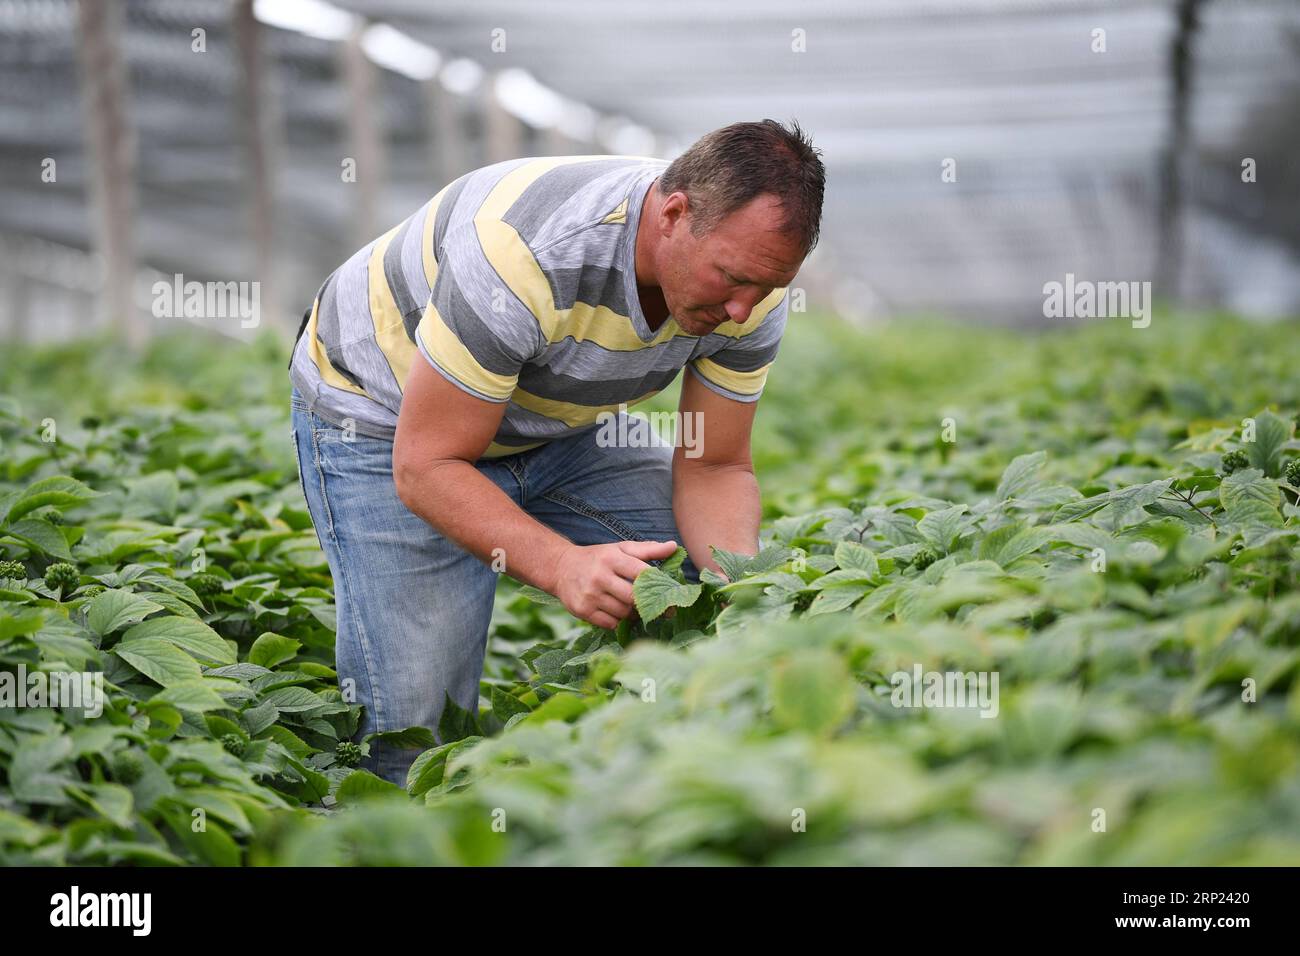 (180816) -- WISCONSIN, Aug. 16, 2018 -- Joe Heil works in his ginseng farm in Wausau, Wisconsin, the United States, July 25, 2018. Joe Heil has grown ginseng for more than 20 years. His Wisconsin-based farm with 50-acre ginseng was lucrative. Recently, however, the fear of loss looms large in his mind. As the U.S.-ignited trade frictions with China escalate, some customers who have expressed interest in purchasing Wisconsin ginseng have backed off. TO GO WITH Feature: U.S. ginseng industry hurt in ongoing U.S.-China trade frictions ) (zhf) U.S.-WISCONSIN-GINSENG-TRADE-FARM LiuxJie PUBLICATIONx Stock Photo